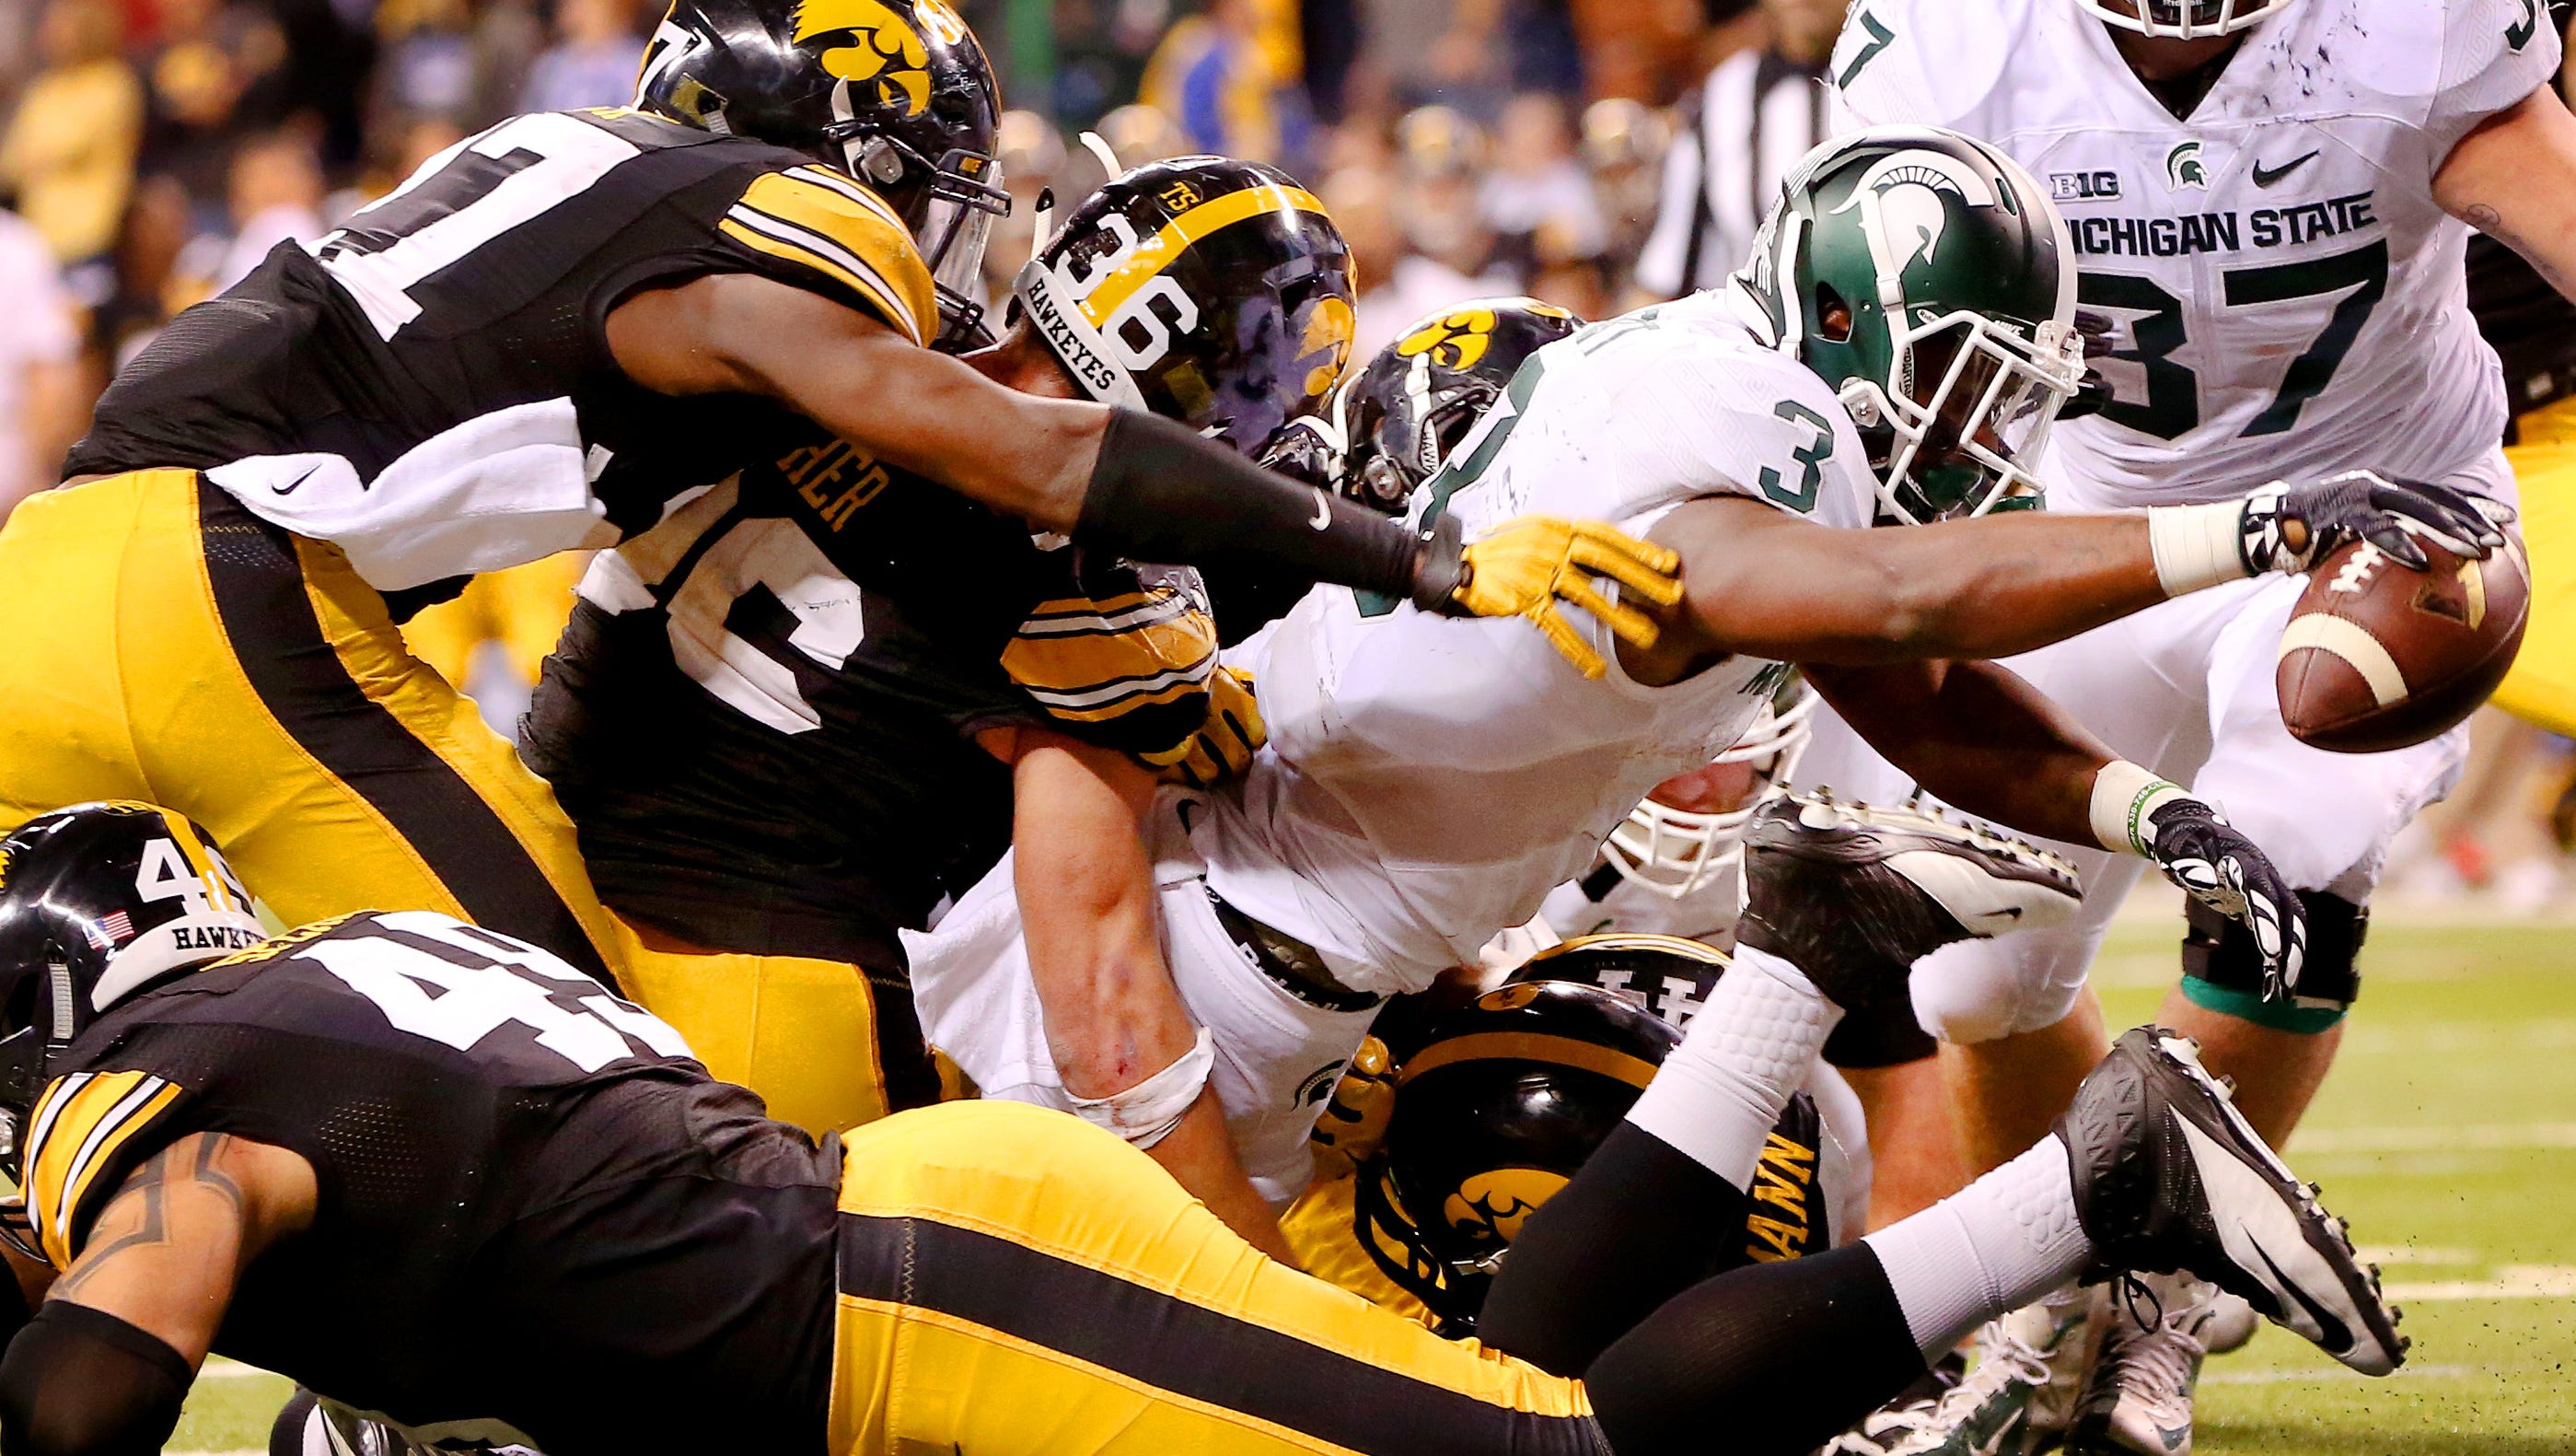 Michigan State running back LJ Scott (3) reaches across the goal line for the go ahead touchdown against Iowa during the Big Ten Championship Game at Lucas Oil Stadium on Dec. 5, 2015.